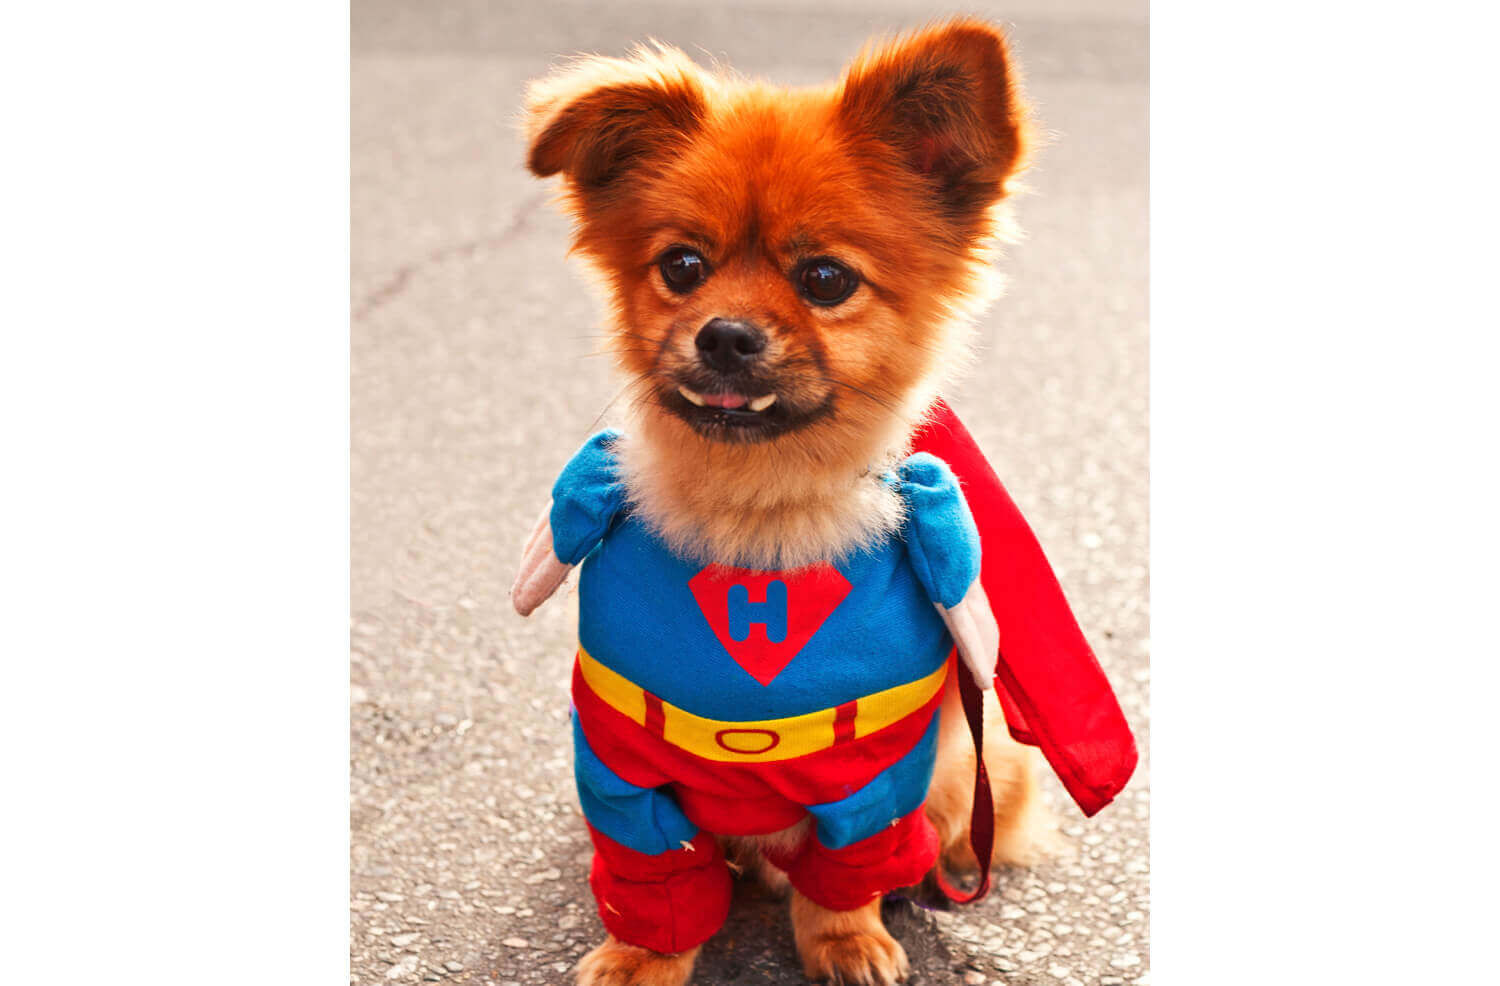 Is Your Dog’s Halloween Costume the Best?